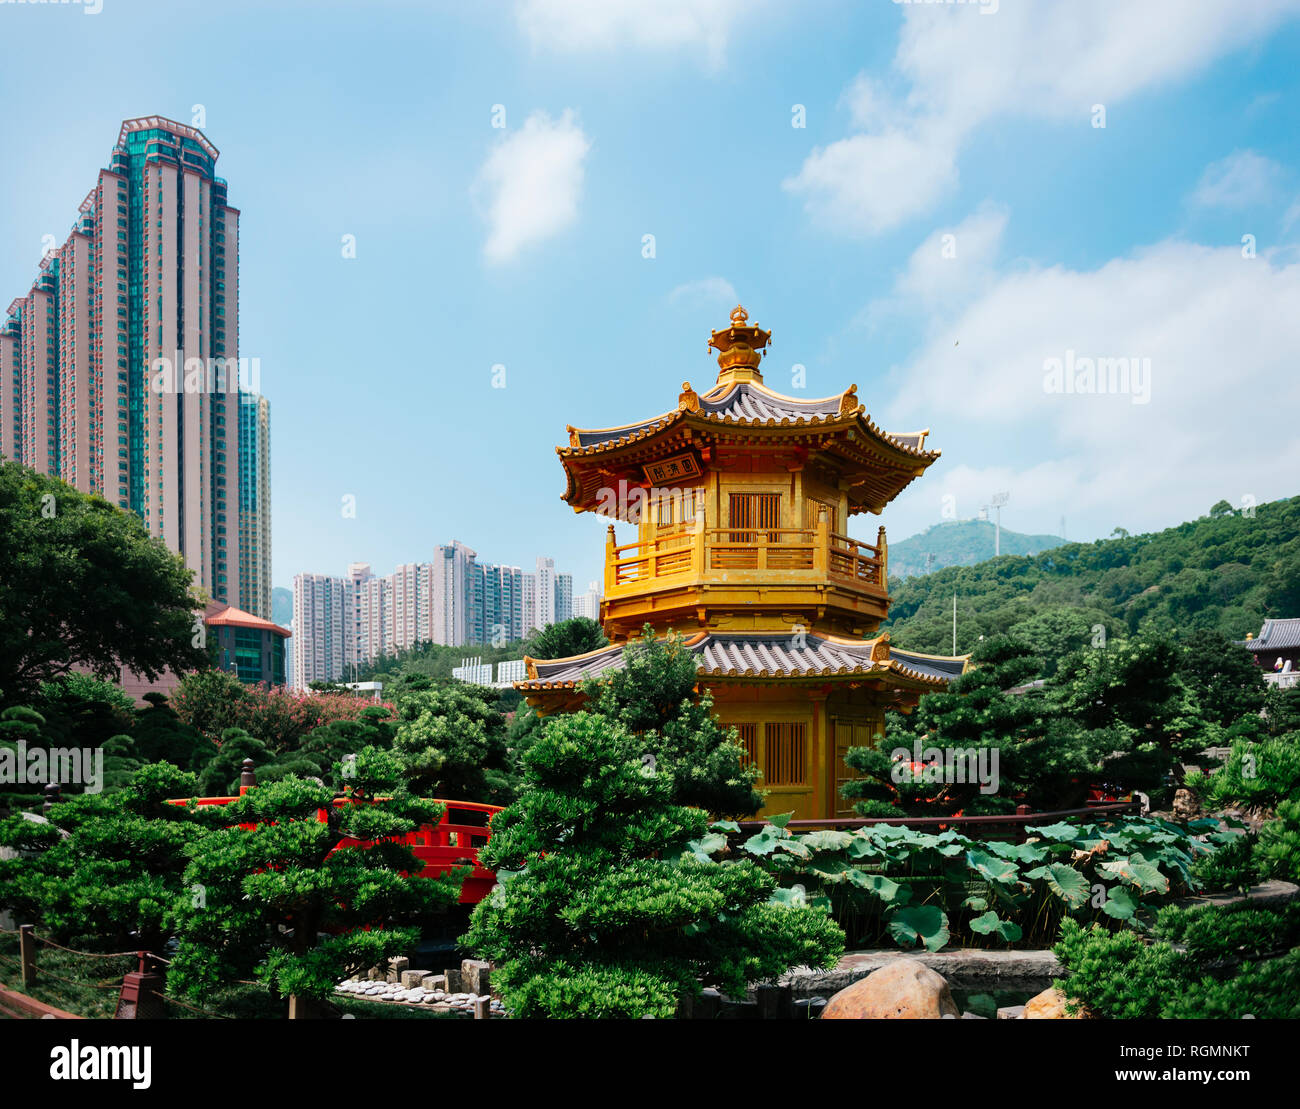 China, Hong Kong, Diamond Hill, Nan Lian Garden, Golden Pavilion of Absolute Perfection surrounded by skyscrapers Stock Photo